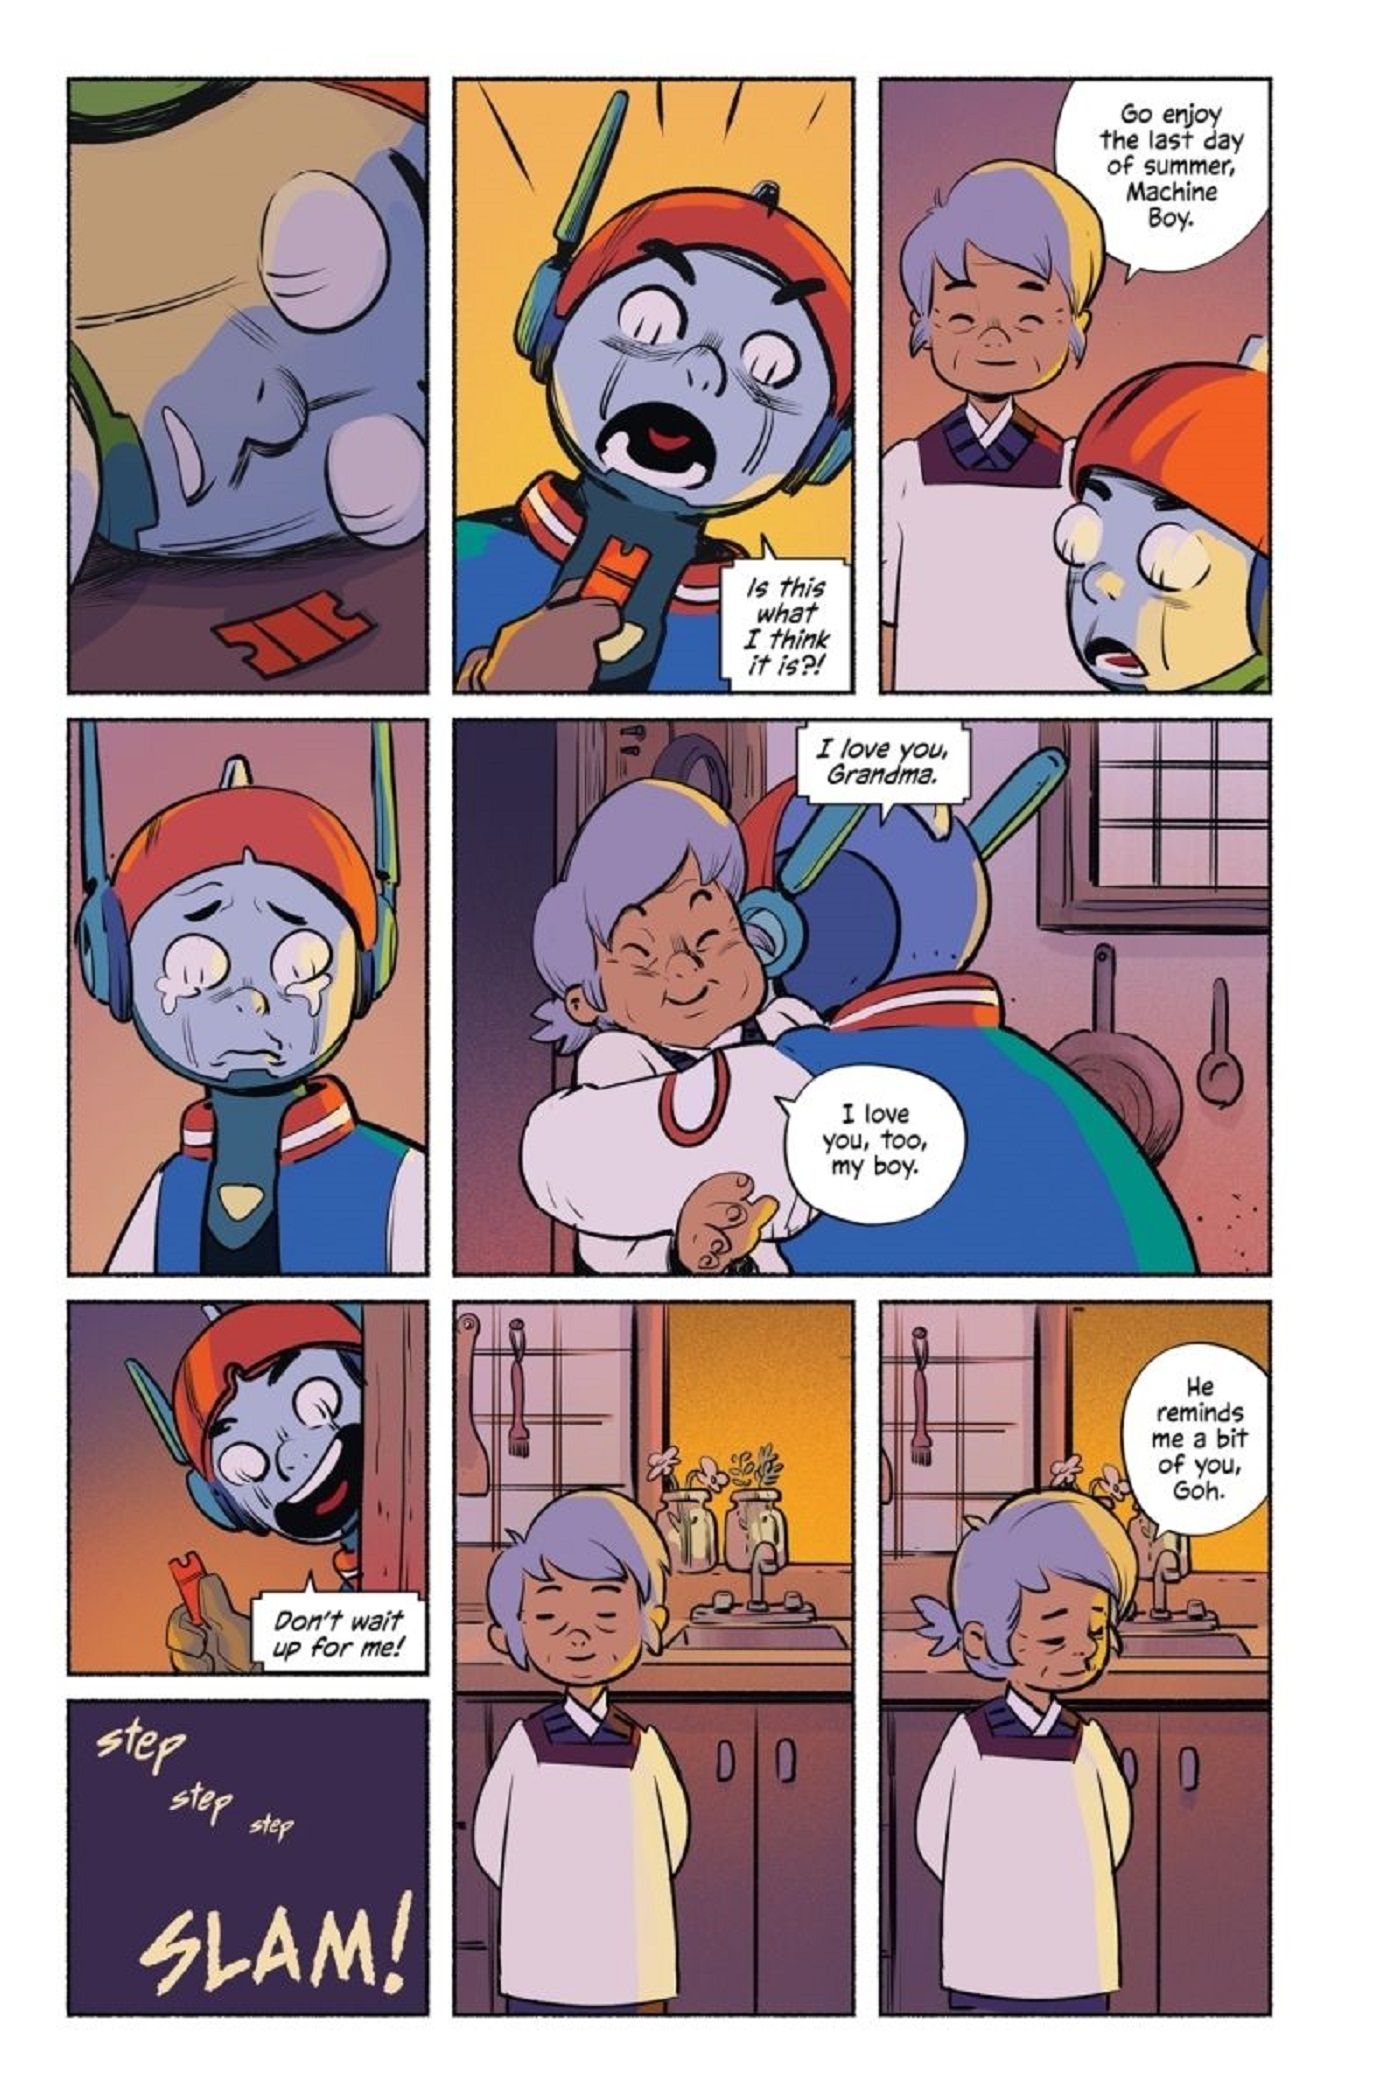 Everyday Hero Machine Boy OGN Preview Page 12